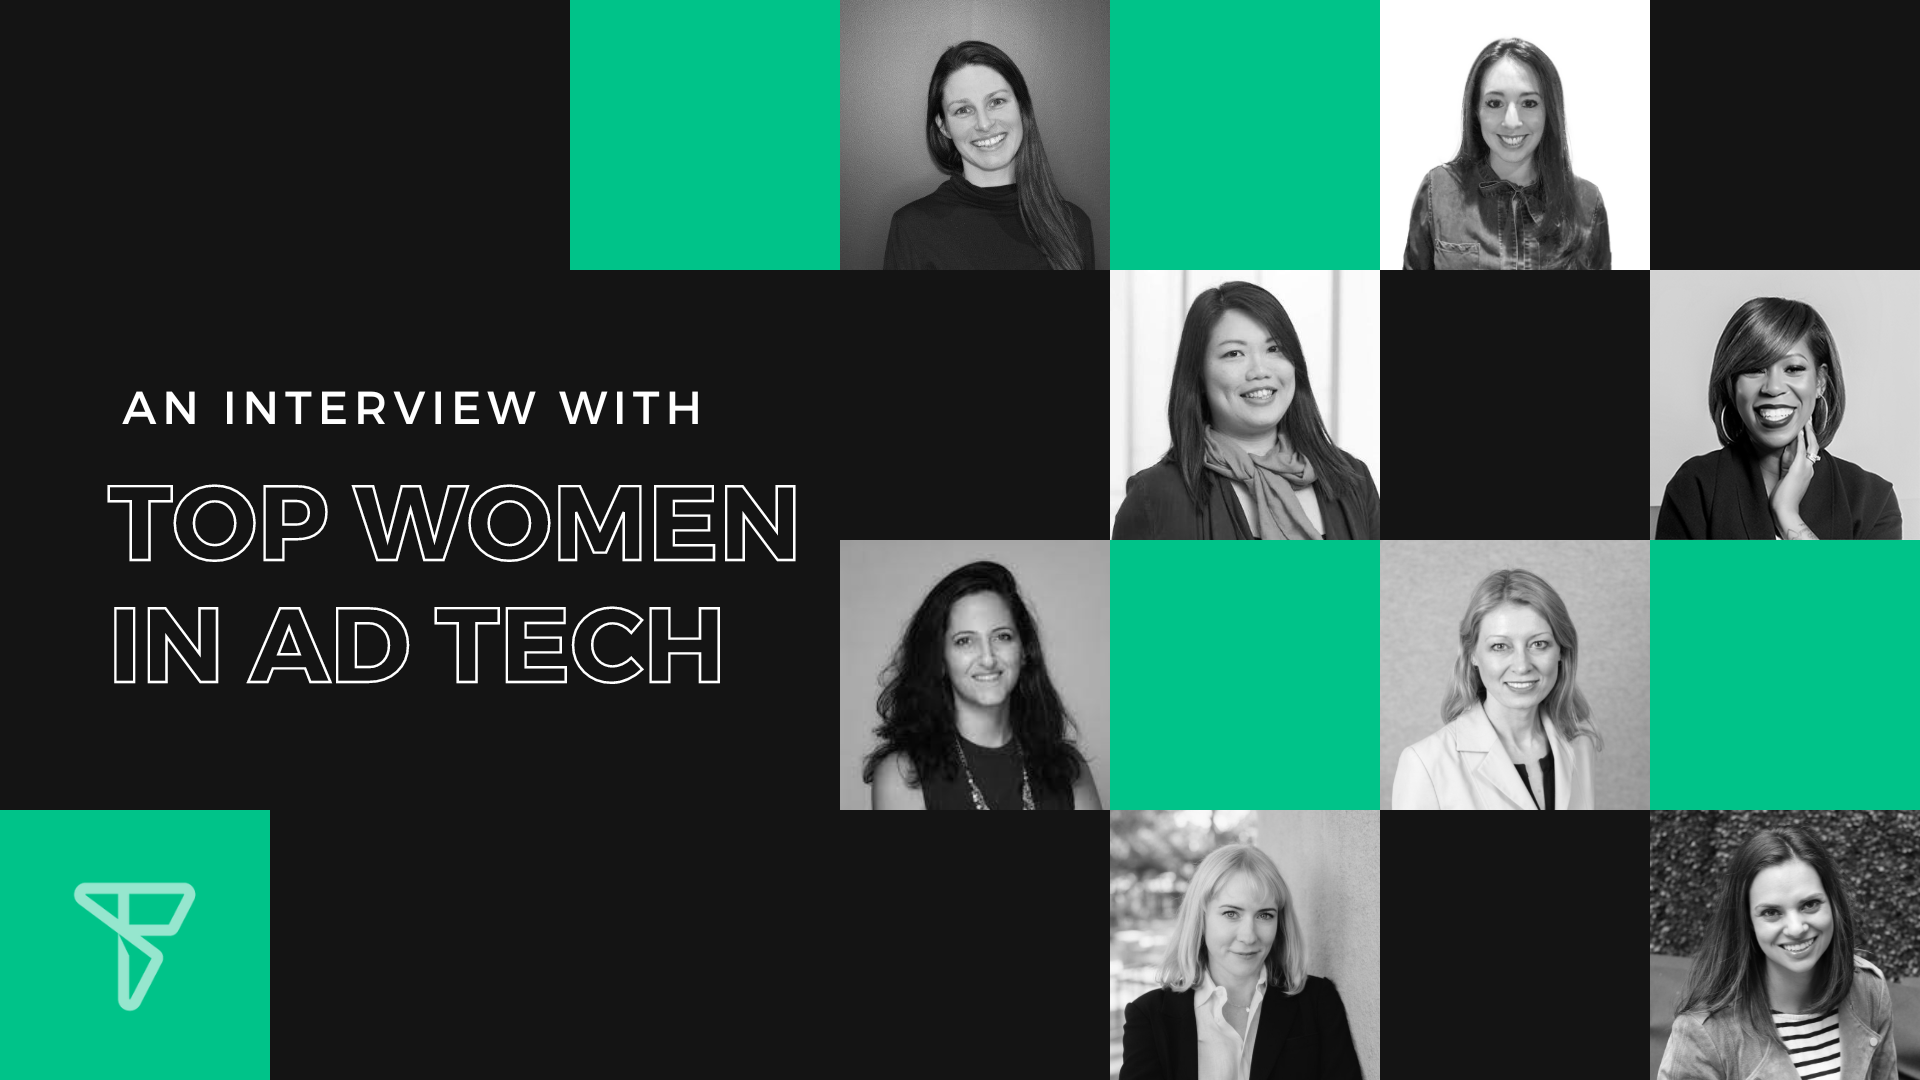 Inspiring Leaders: An Interview with Top Women in Ad Tech